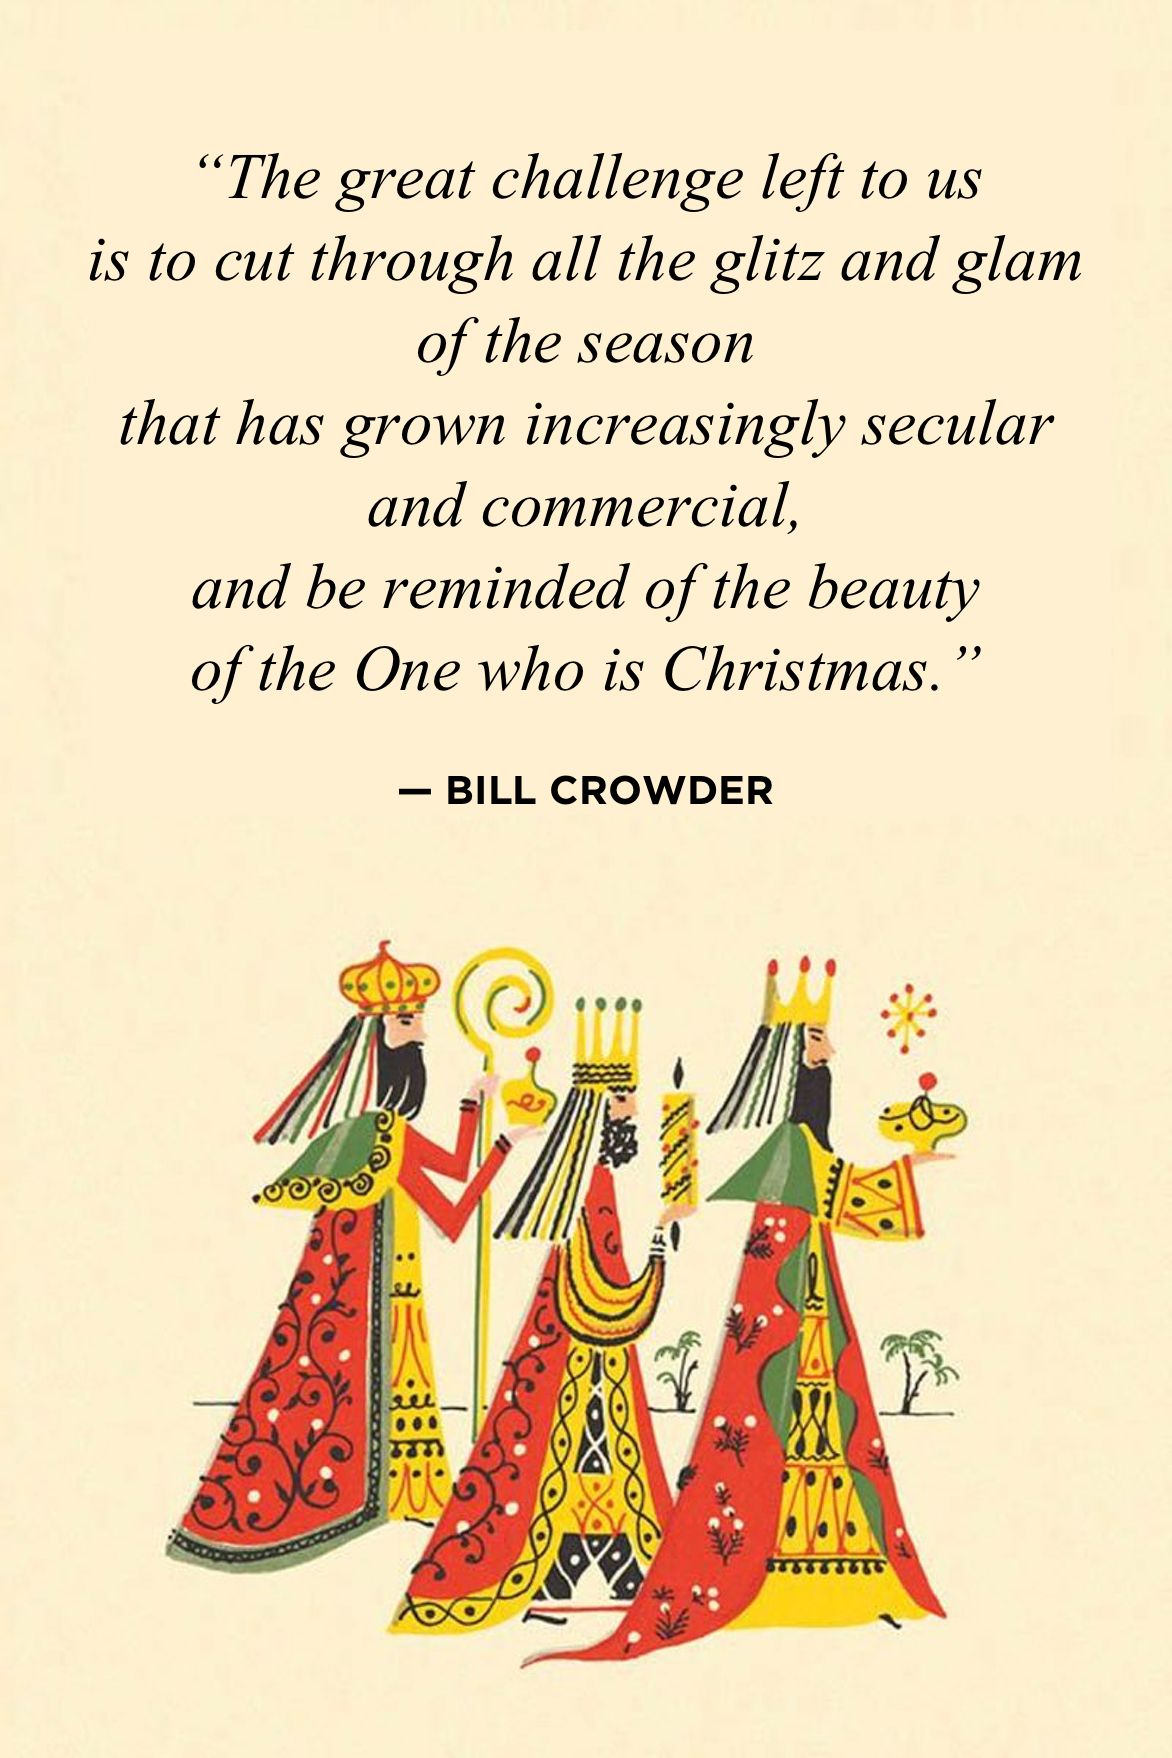 beautiful religious christmas pictures